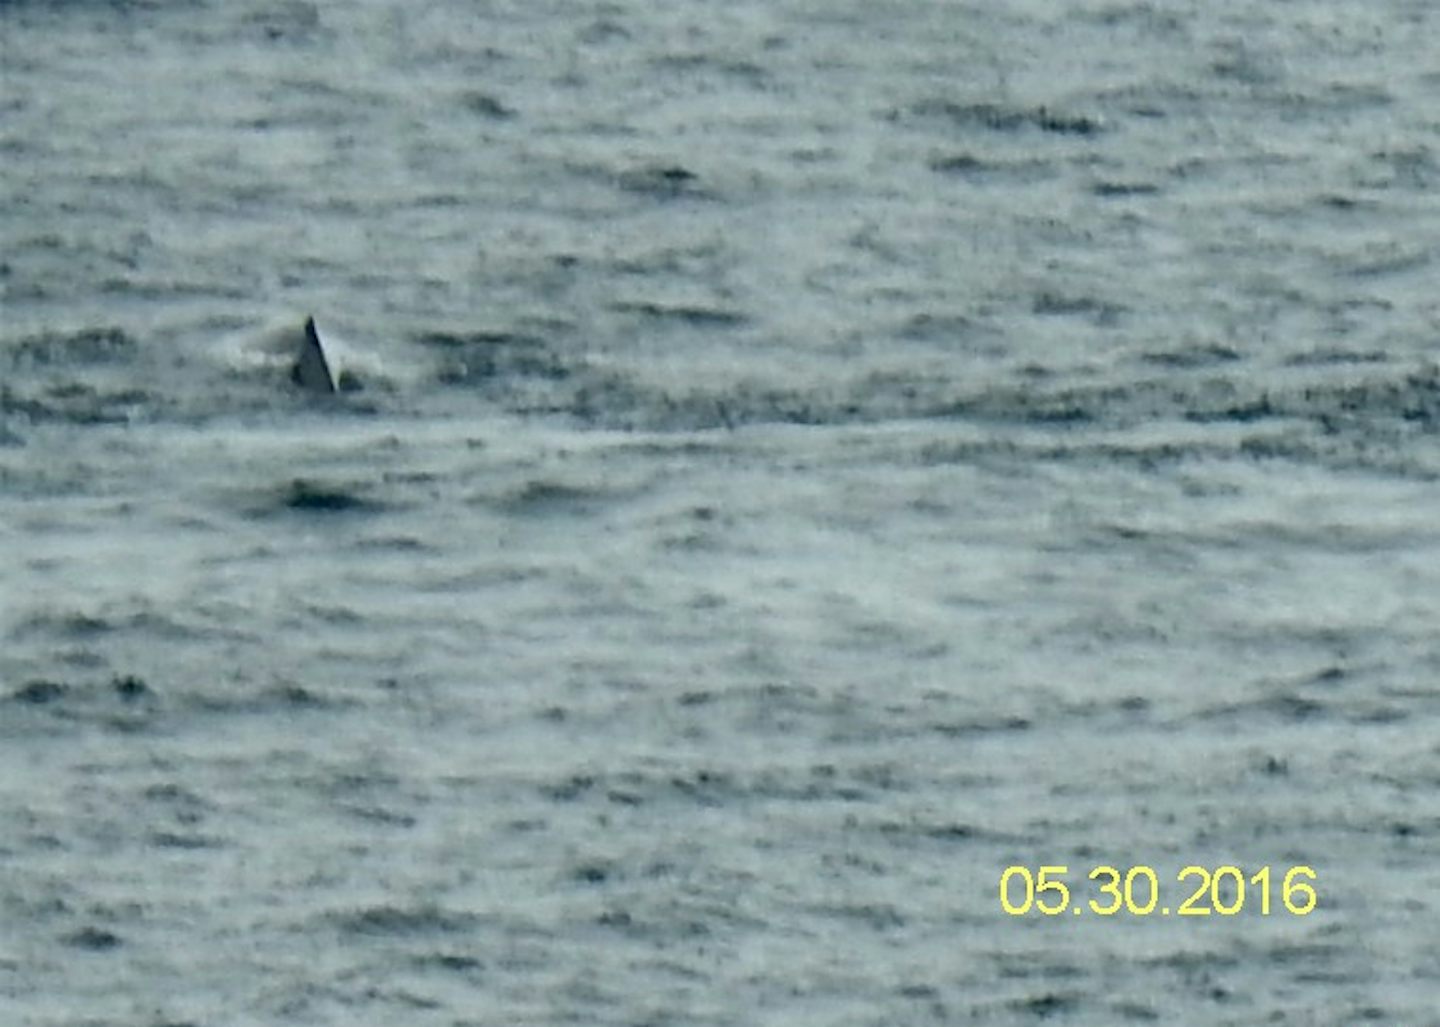 Orcas as seen from our balcony